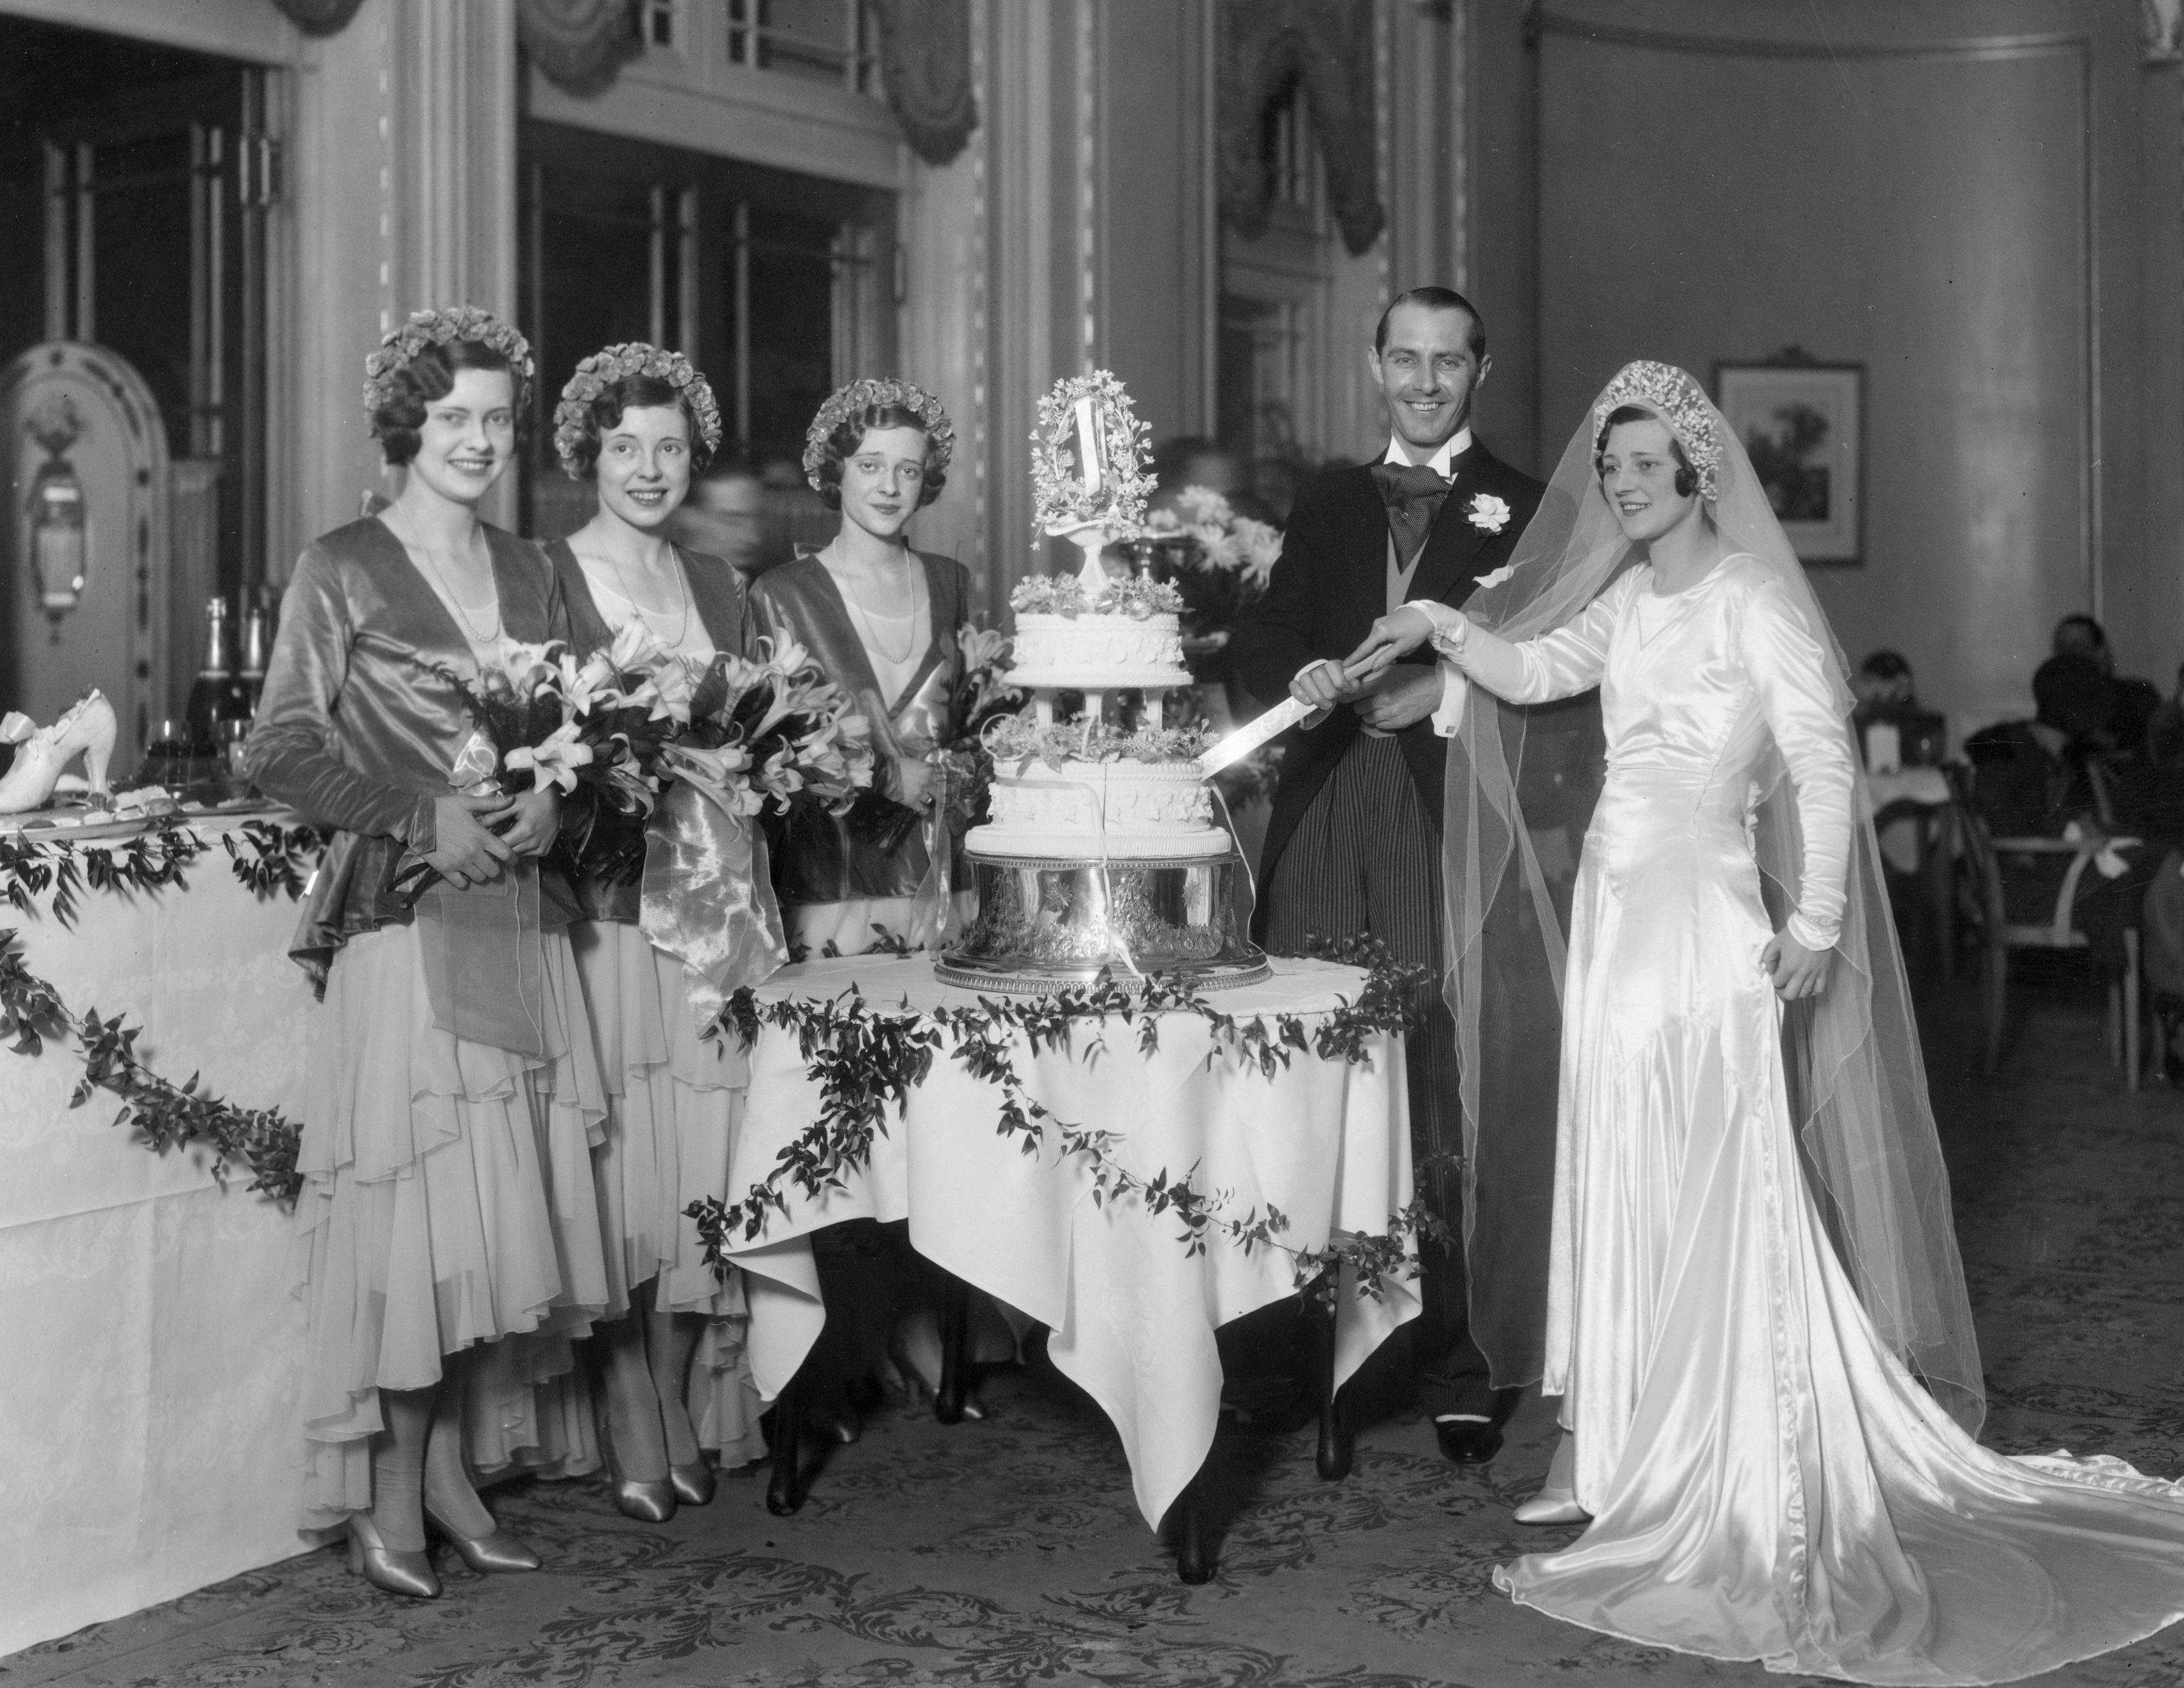 1930s Wedding History - Dresses, Shoes, Accessories